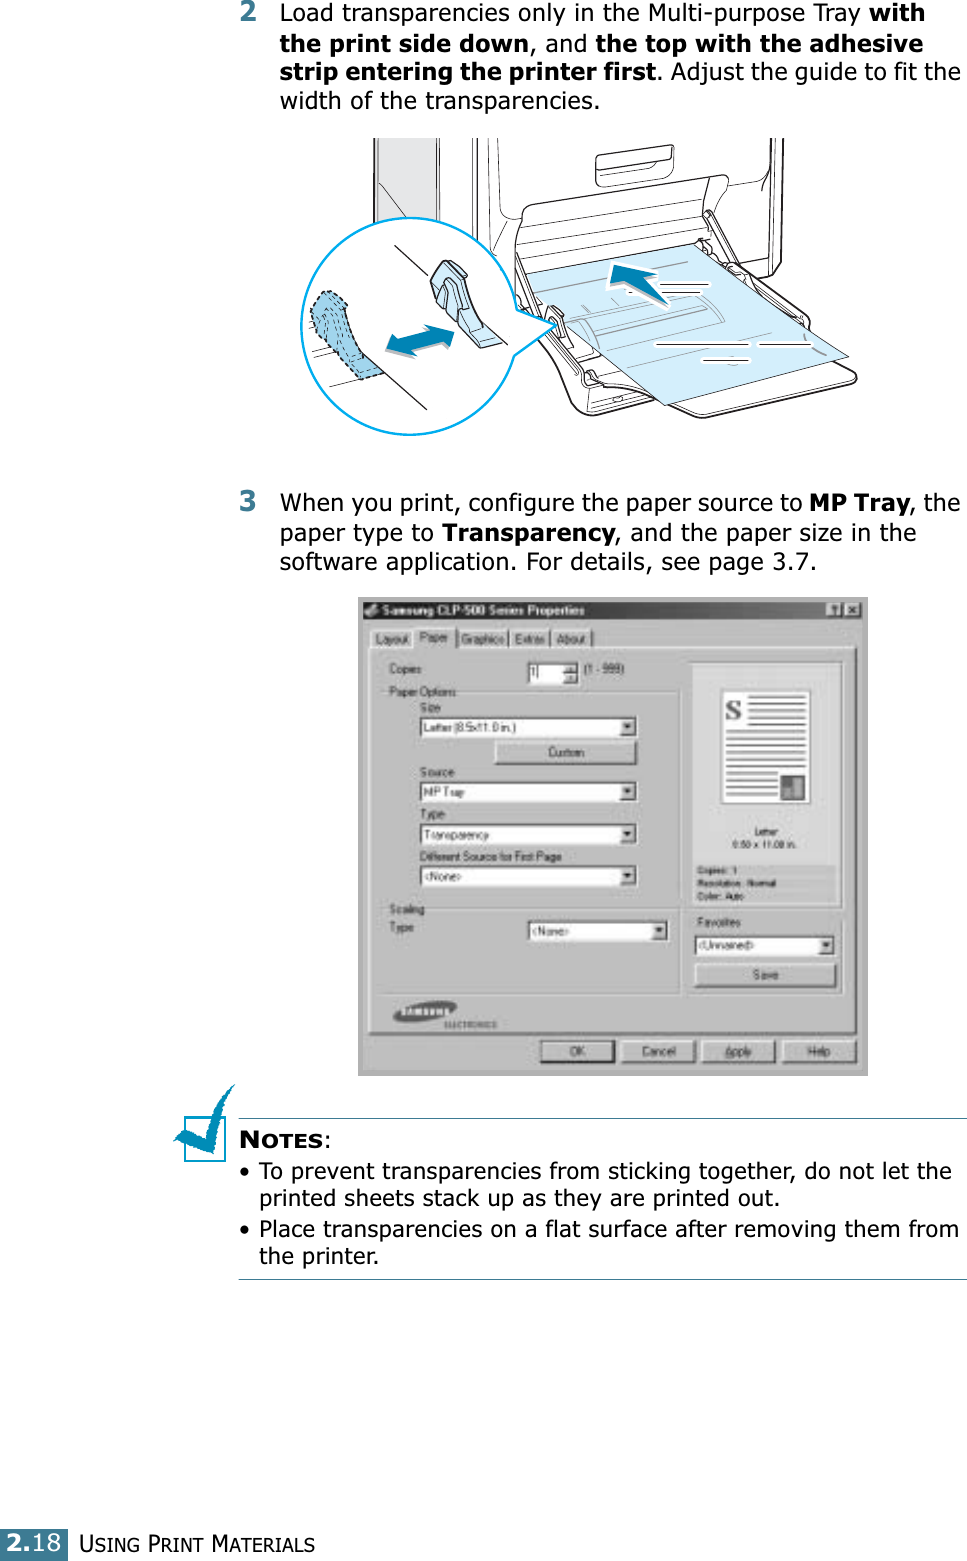 USING PRINT MATERIALS2.182Load transparencies only in the Multi-purpose Tray with the print side down, and the top with the adhesive strip entering the printer first. Adjust the guide to fit the width of the transparencies.3When you print, configure the paper source to MP Tray, the paper type to Transparency, and the paper size in the software application. For details, see page 3.7. NOTES: • To prevent transparencies from sticking together, do not let the printed sheets stack up as they are printed out.• Place transparencies on a flat surface after removing them from the printer.